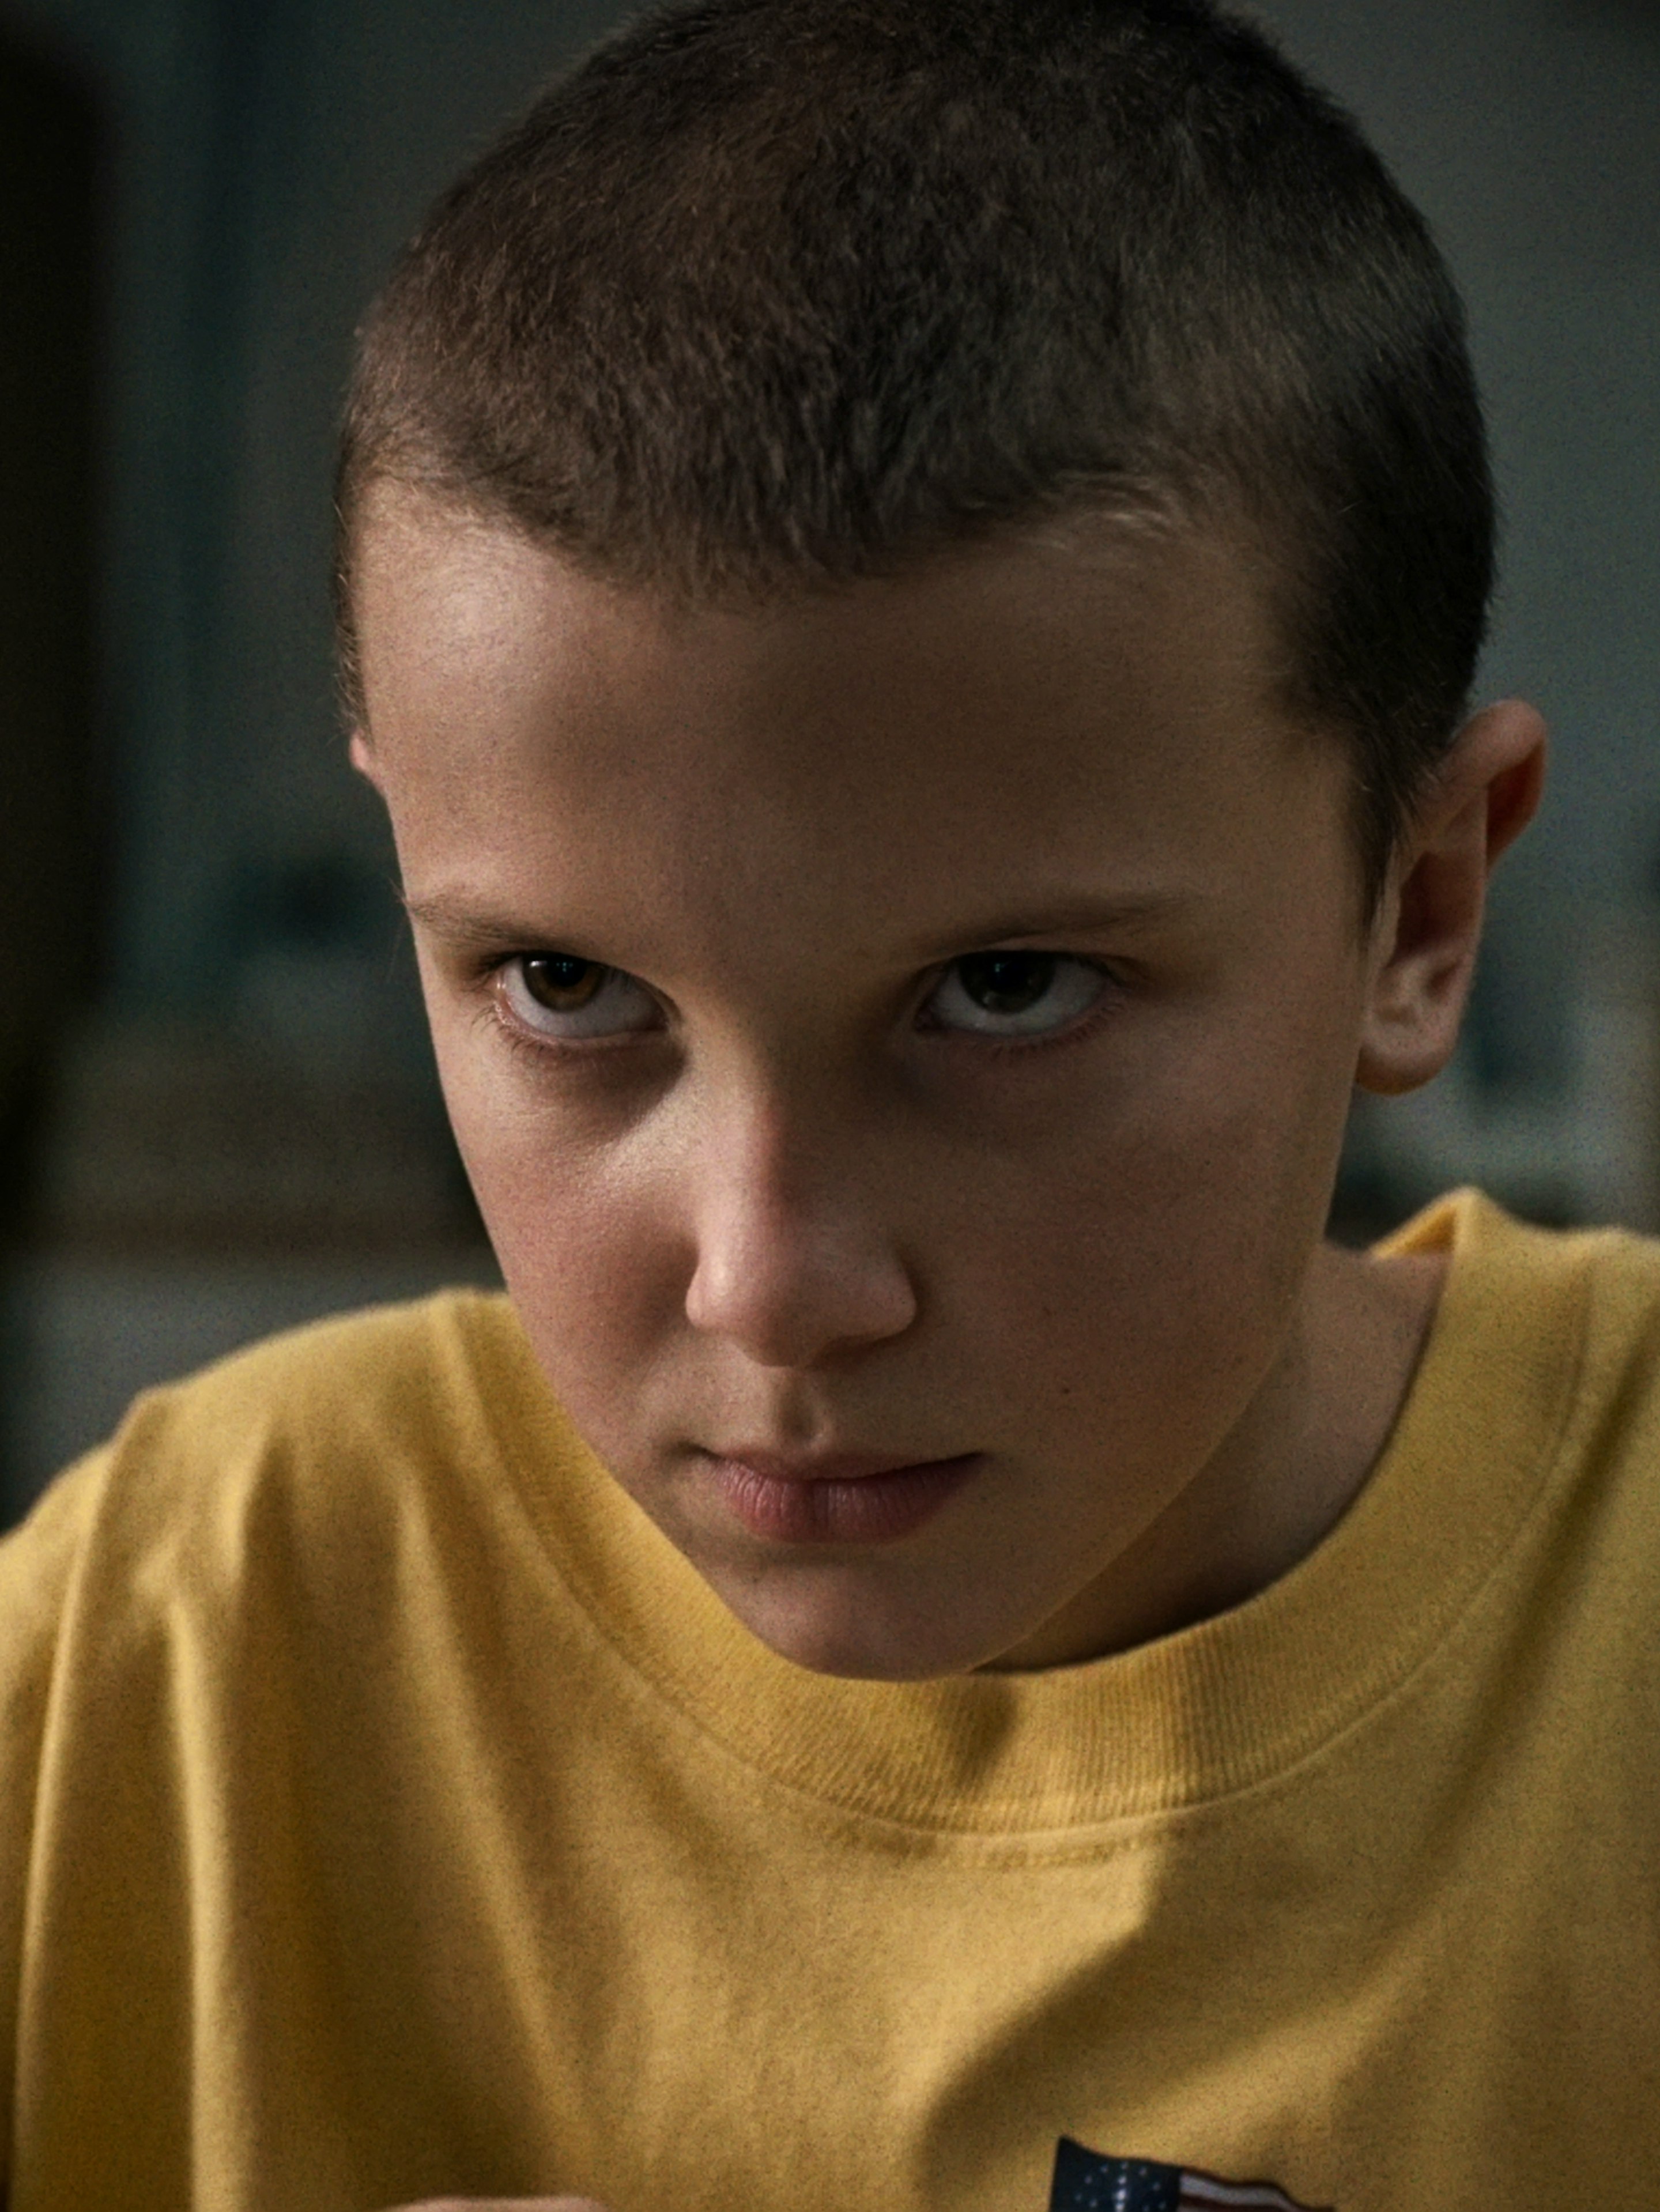 Everything Eleven Eats in Netflix's 'Stranger Things